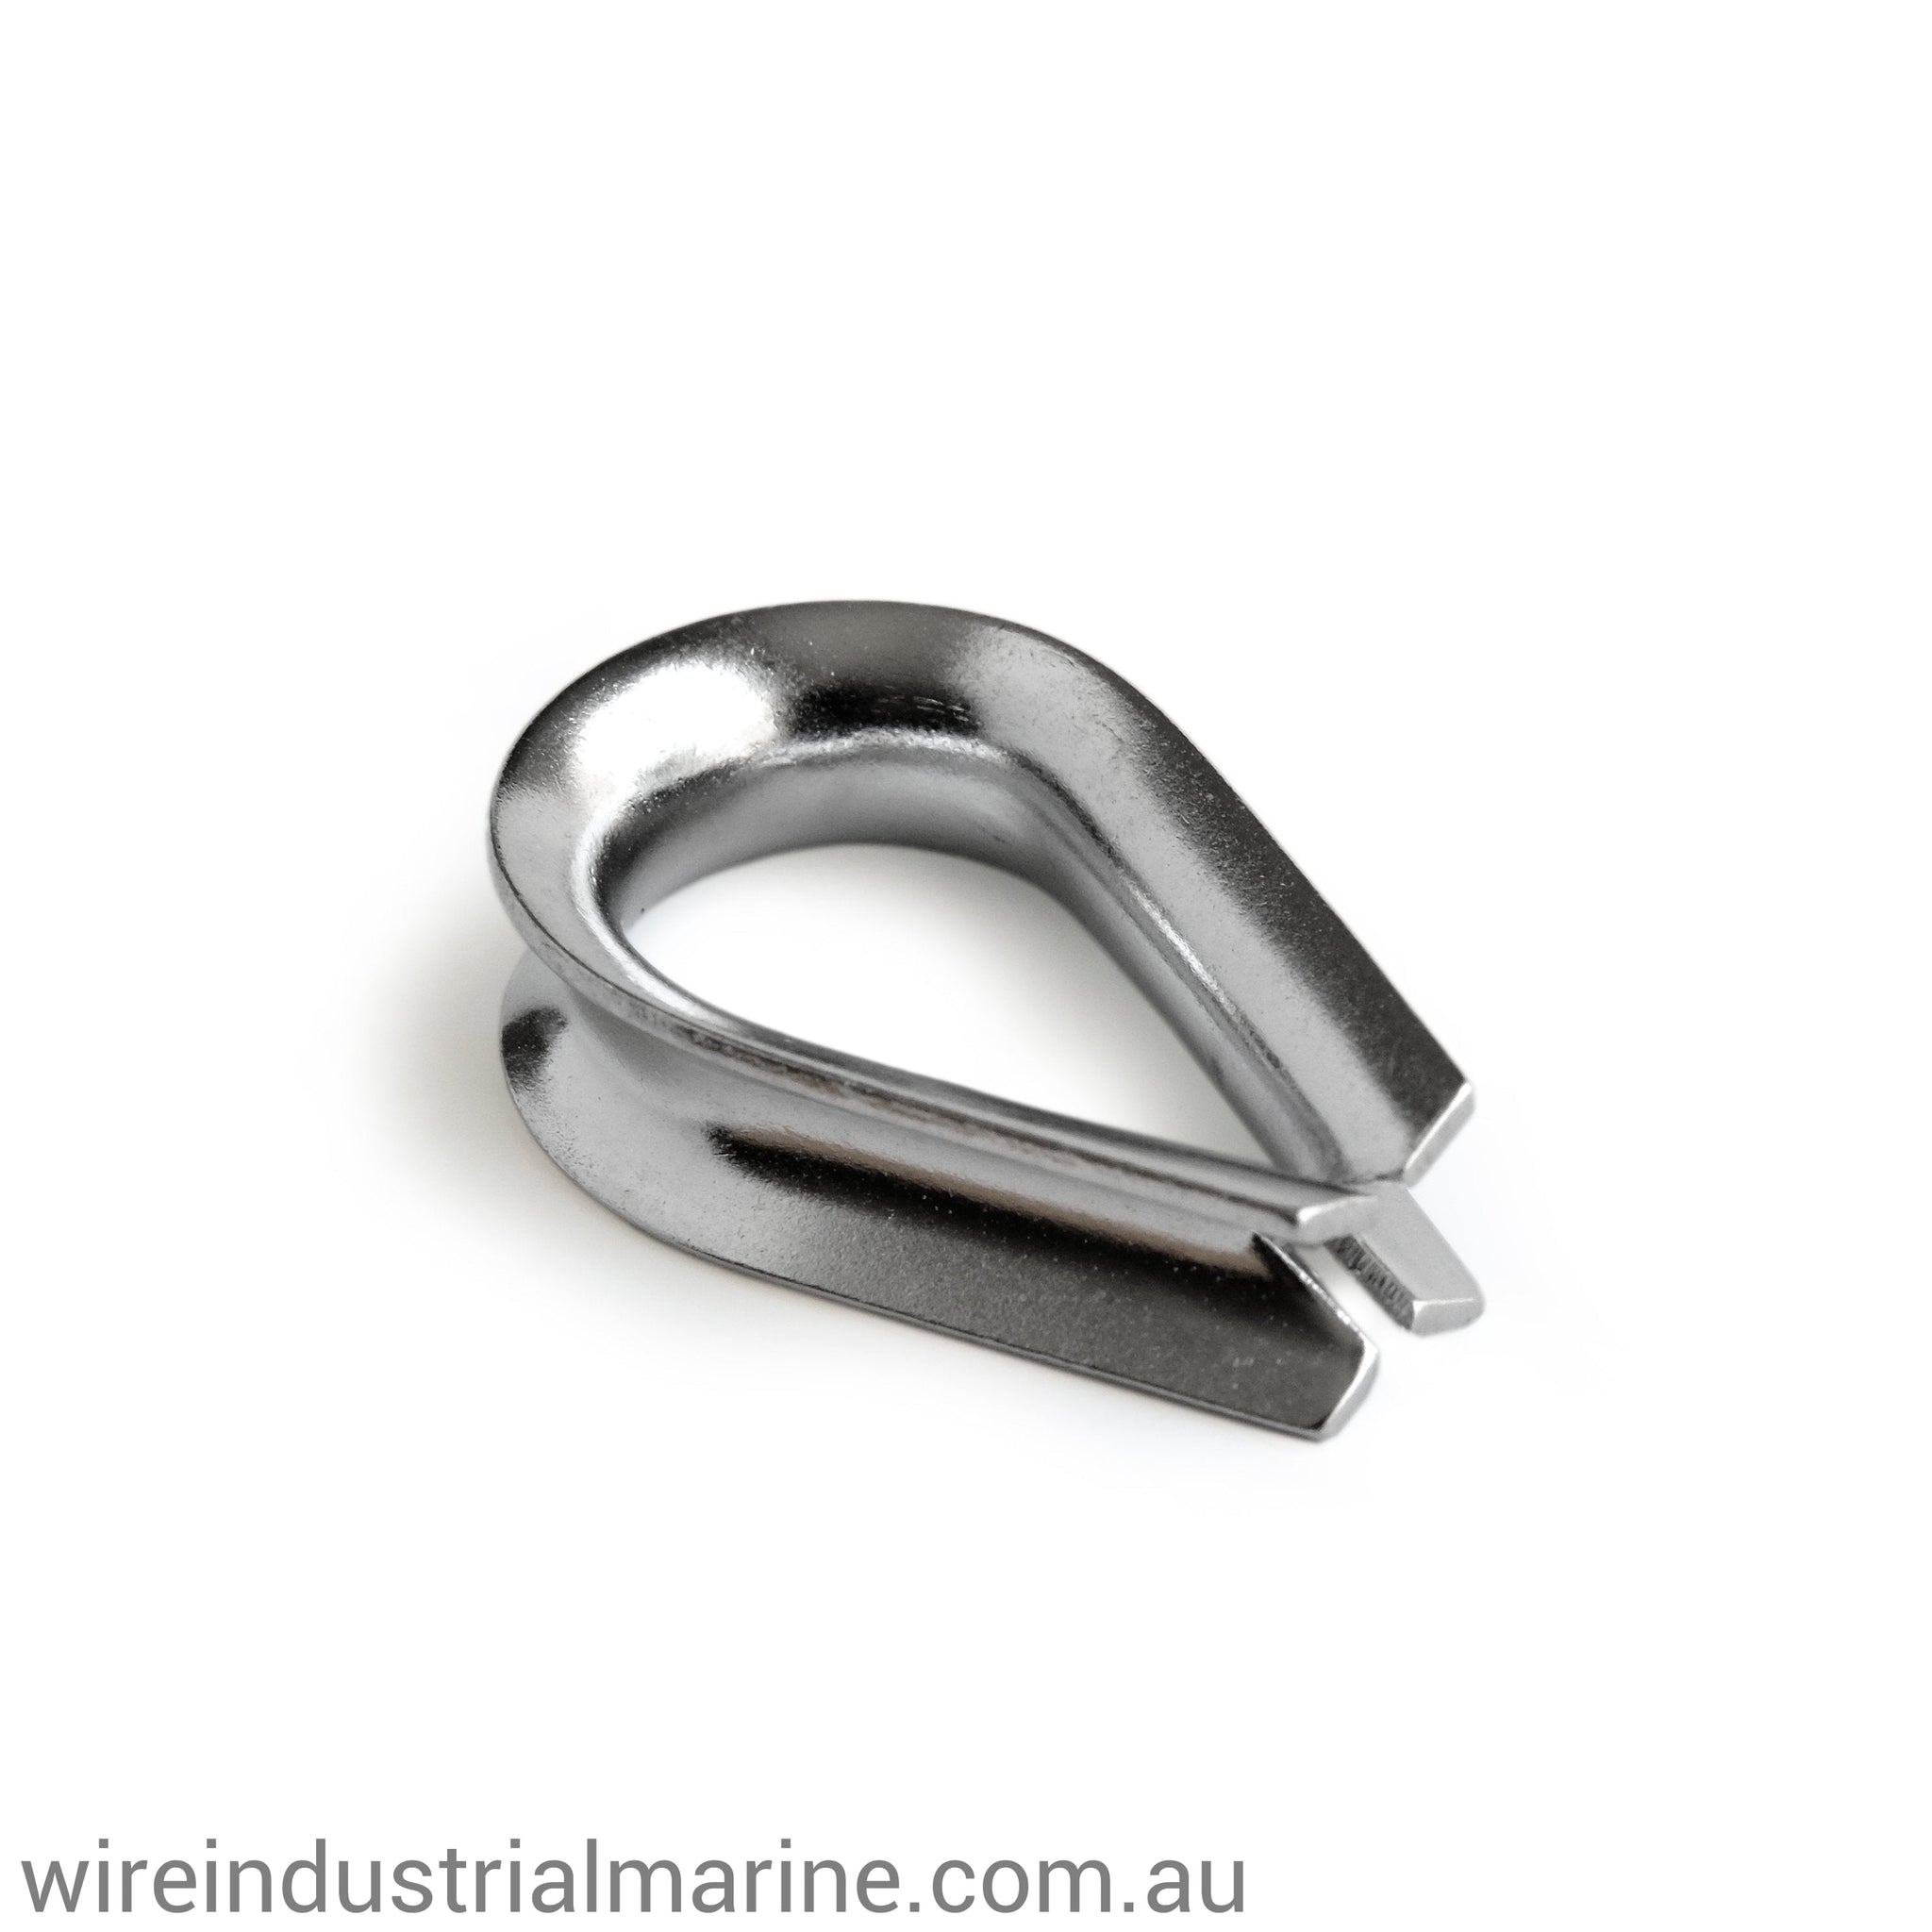 4mm Stainless steel thimbles-Rigging and accessories-wireindustrialmarine